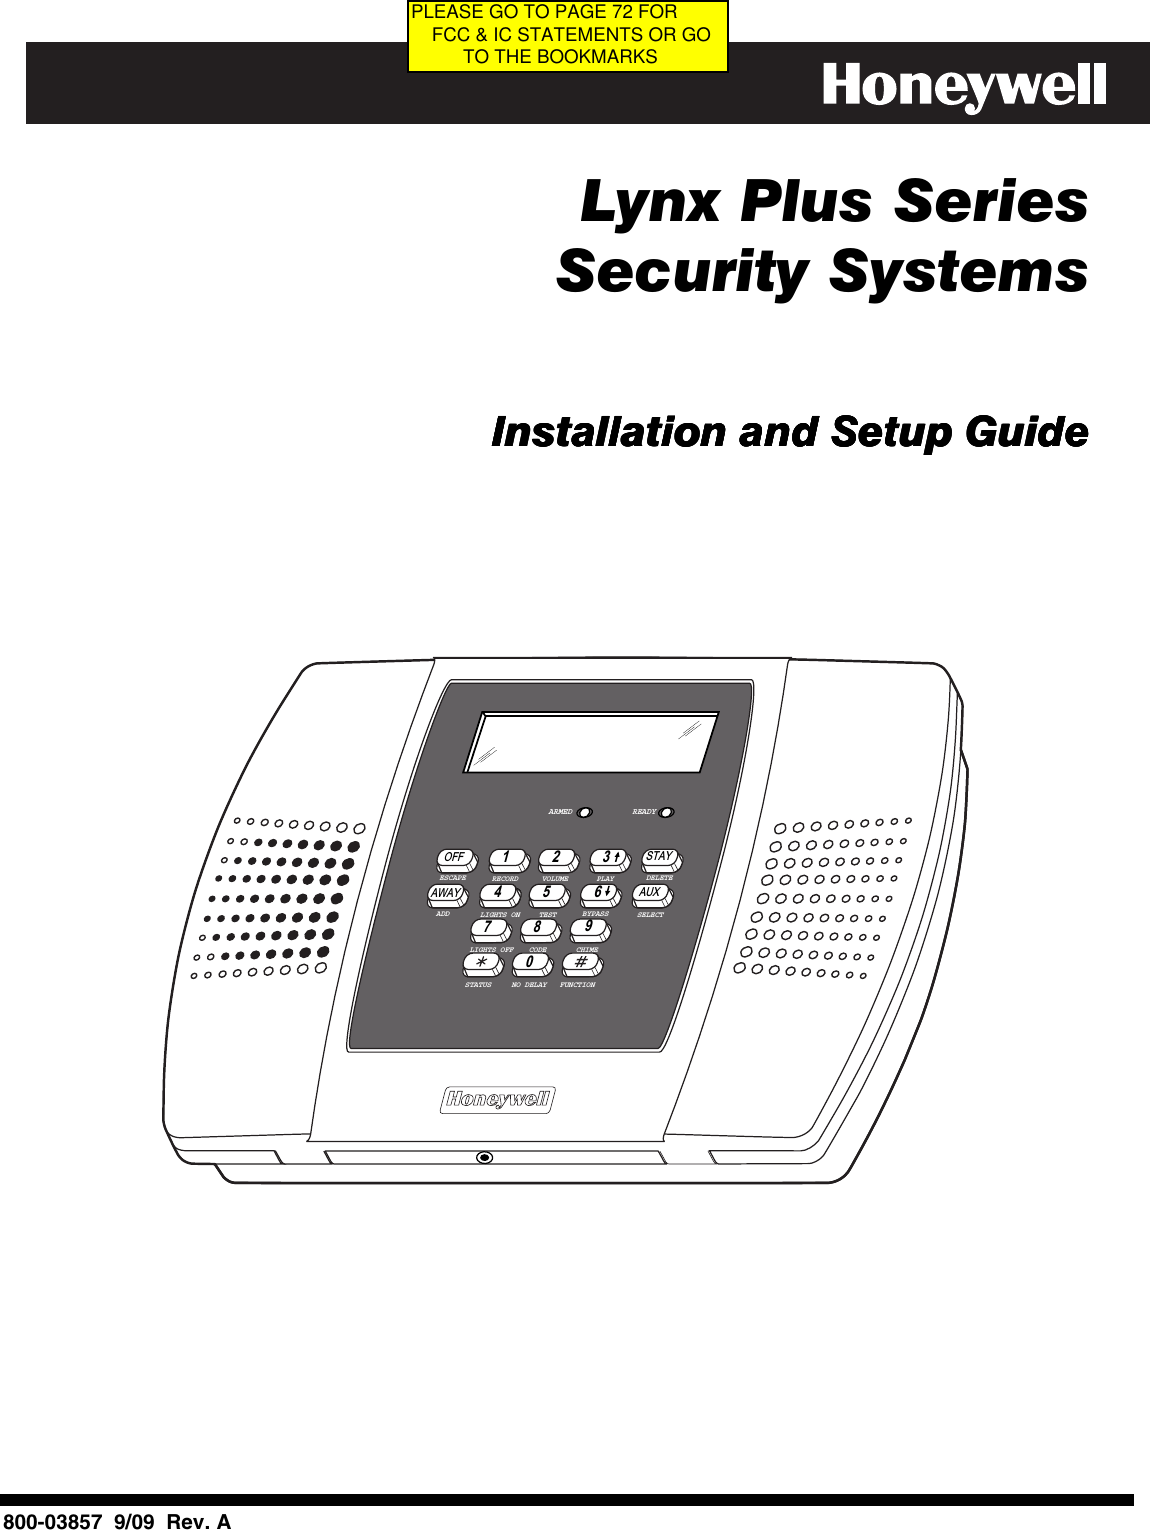   Lynx Plus Series   Security Systems         Installation and Setup GuideInstallation and Setup GuideInstallation and Setup GuideInstallation and Setup Guide                    BYPASSNO DELAYRECORDTESTFUNCTIONSTATUSVOLUME PLAYCODELIGHTS ONLIGHTS OFF CHIMEESCAPEADDDELETESELECTOFF STAY132AWAY AUX4 65ARMED READY7980                             800-03857  9/09  Rev. APLEASE GO TO PAGE 72 FOR     FCC &amp; IC STATEMENTS OR GO           TO THE BOOKMARKS